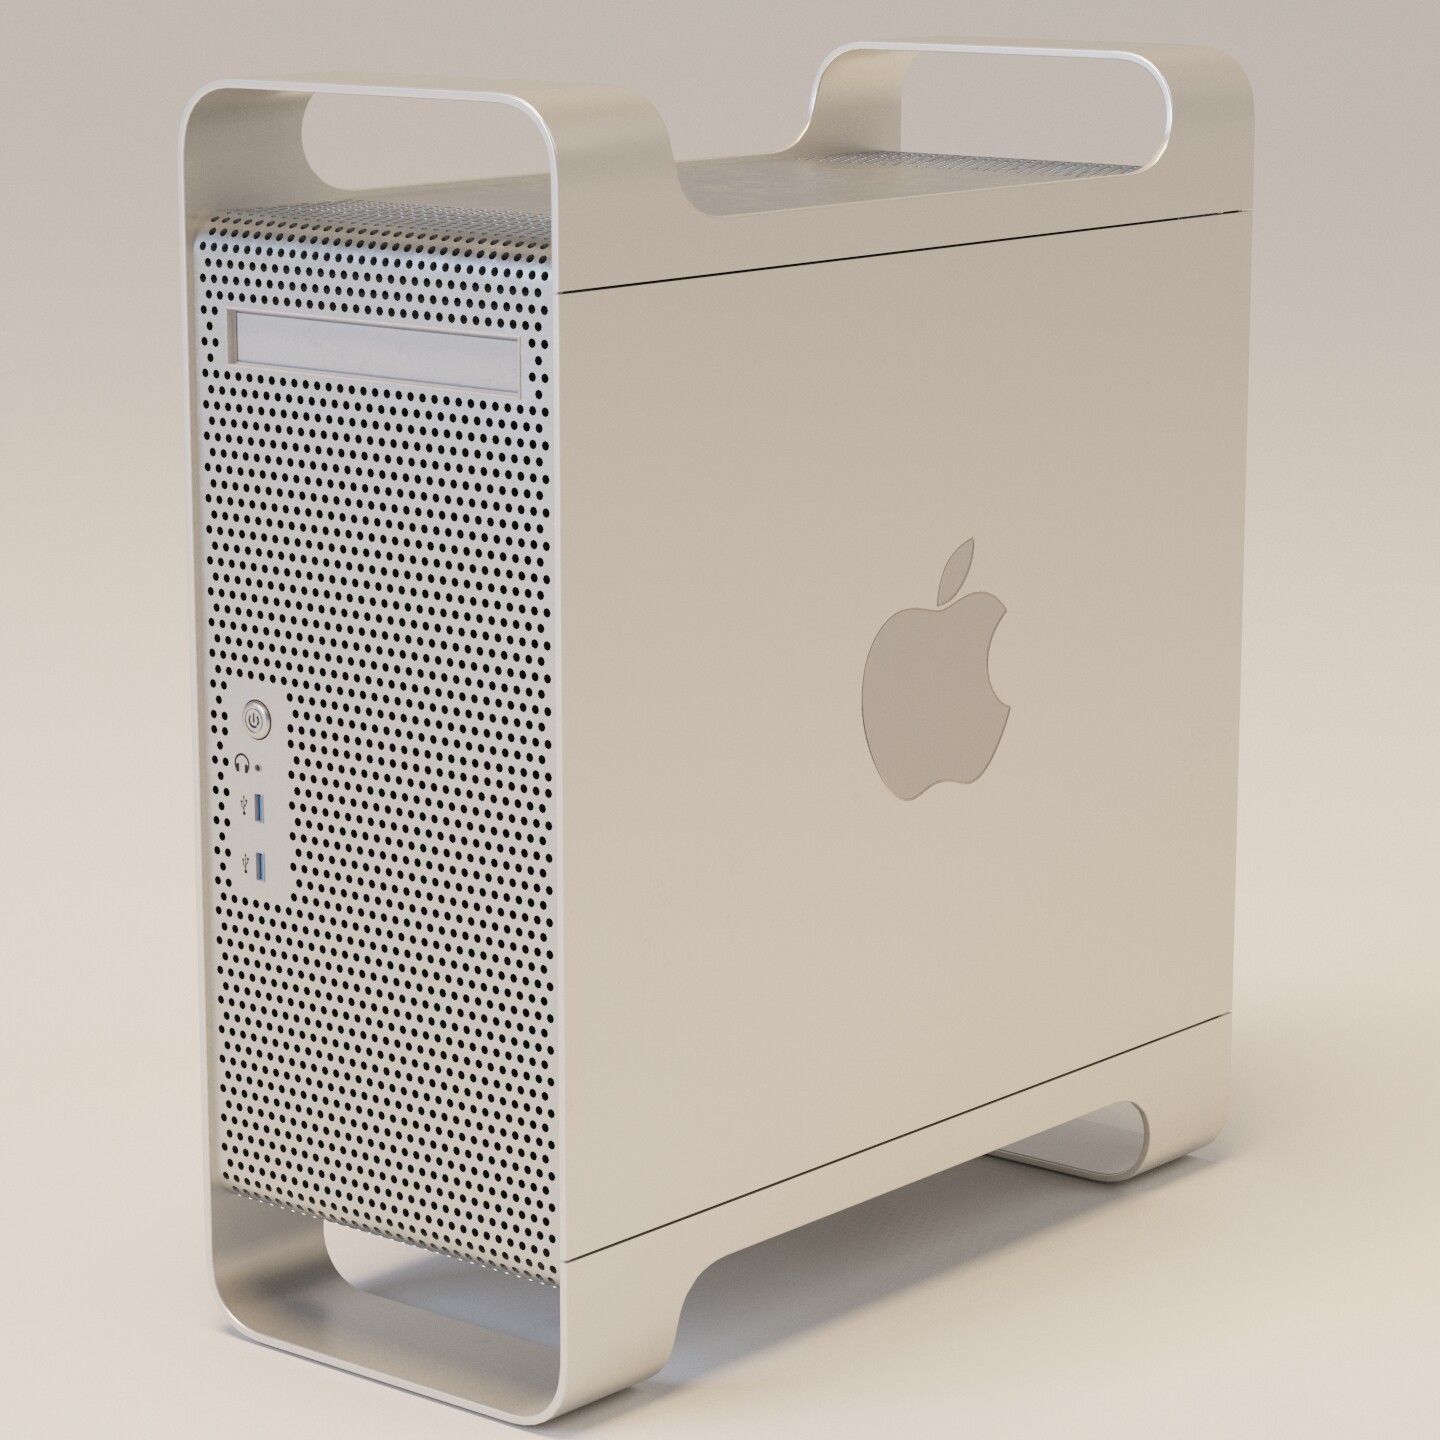 apple mac g5 pictures